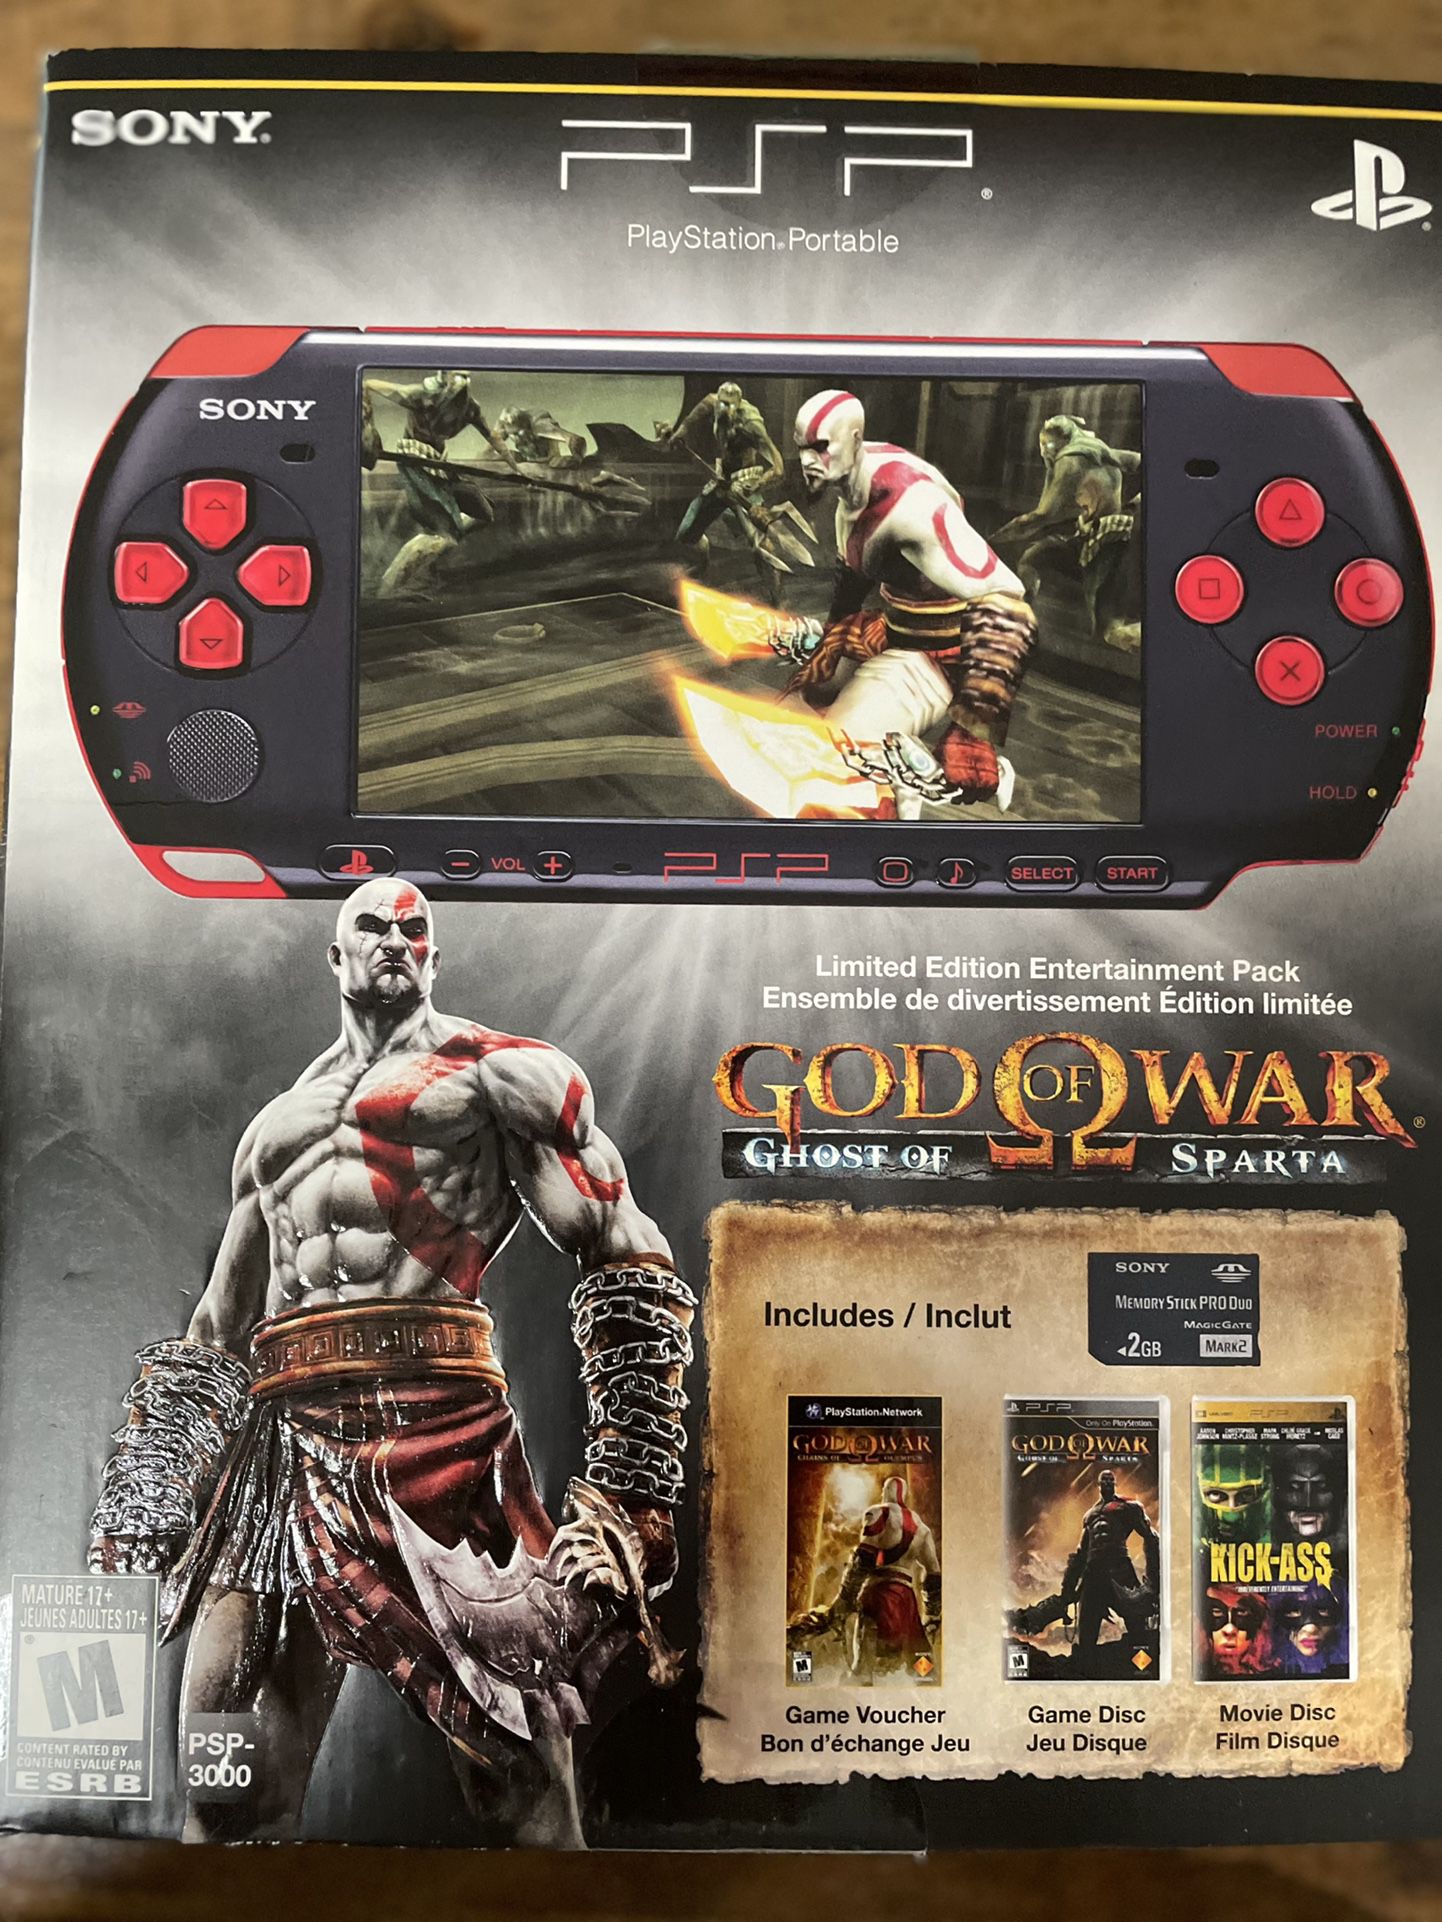 God of War: Chains of Olympus (Sony Playstation Portable